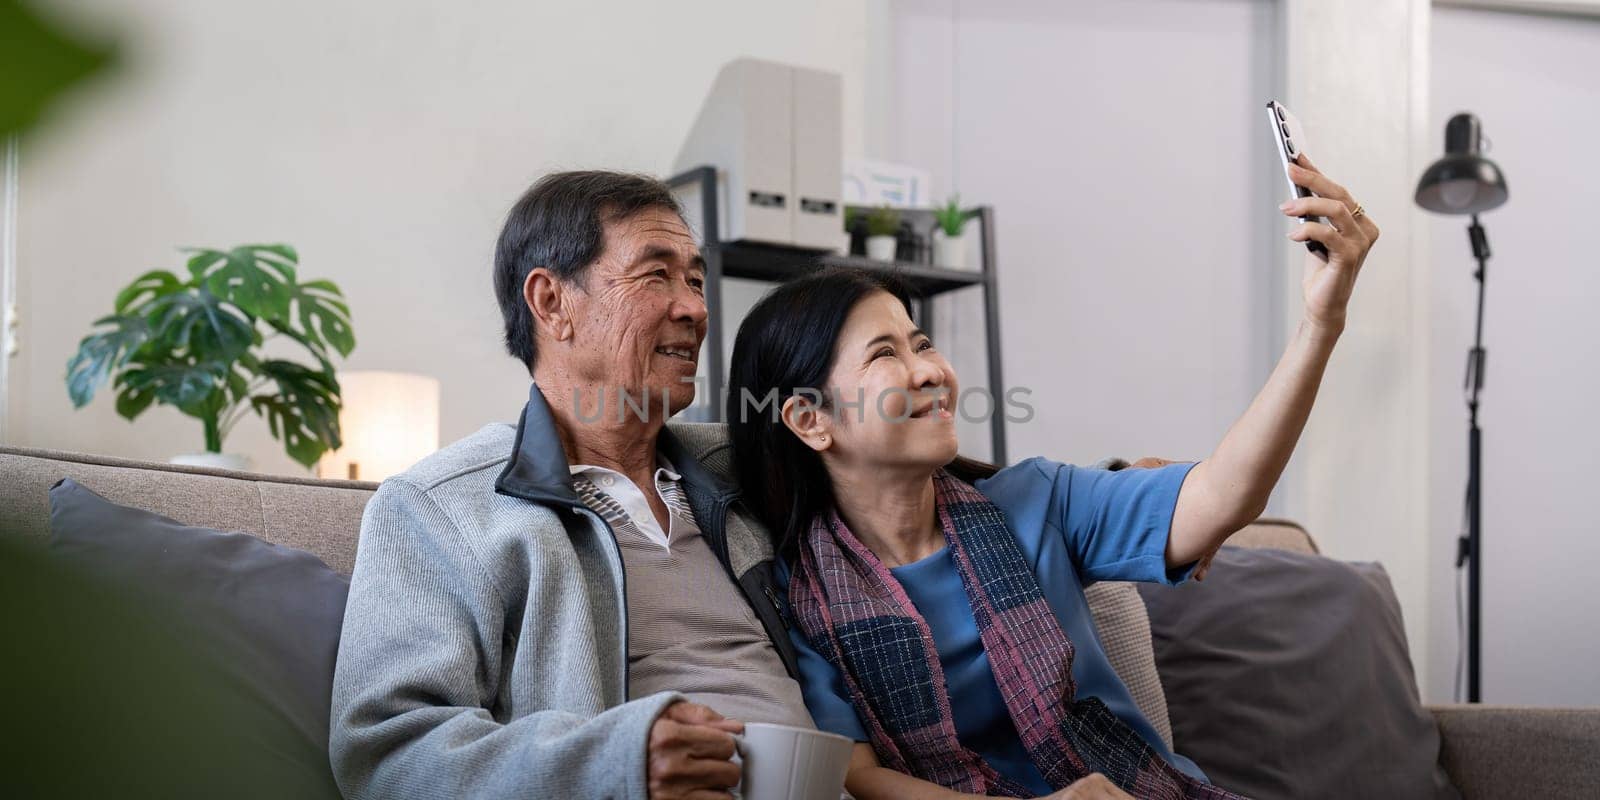 Happy old couple elderly taking selfie on cellphone, senior mature spouses wife and husband laughing holding phone make self portrait on smartphone camera.